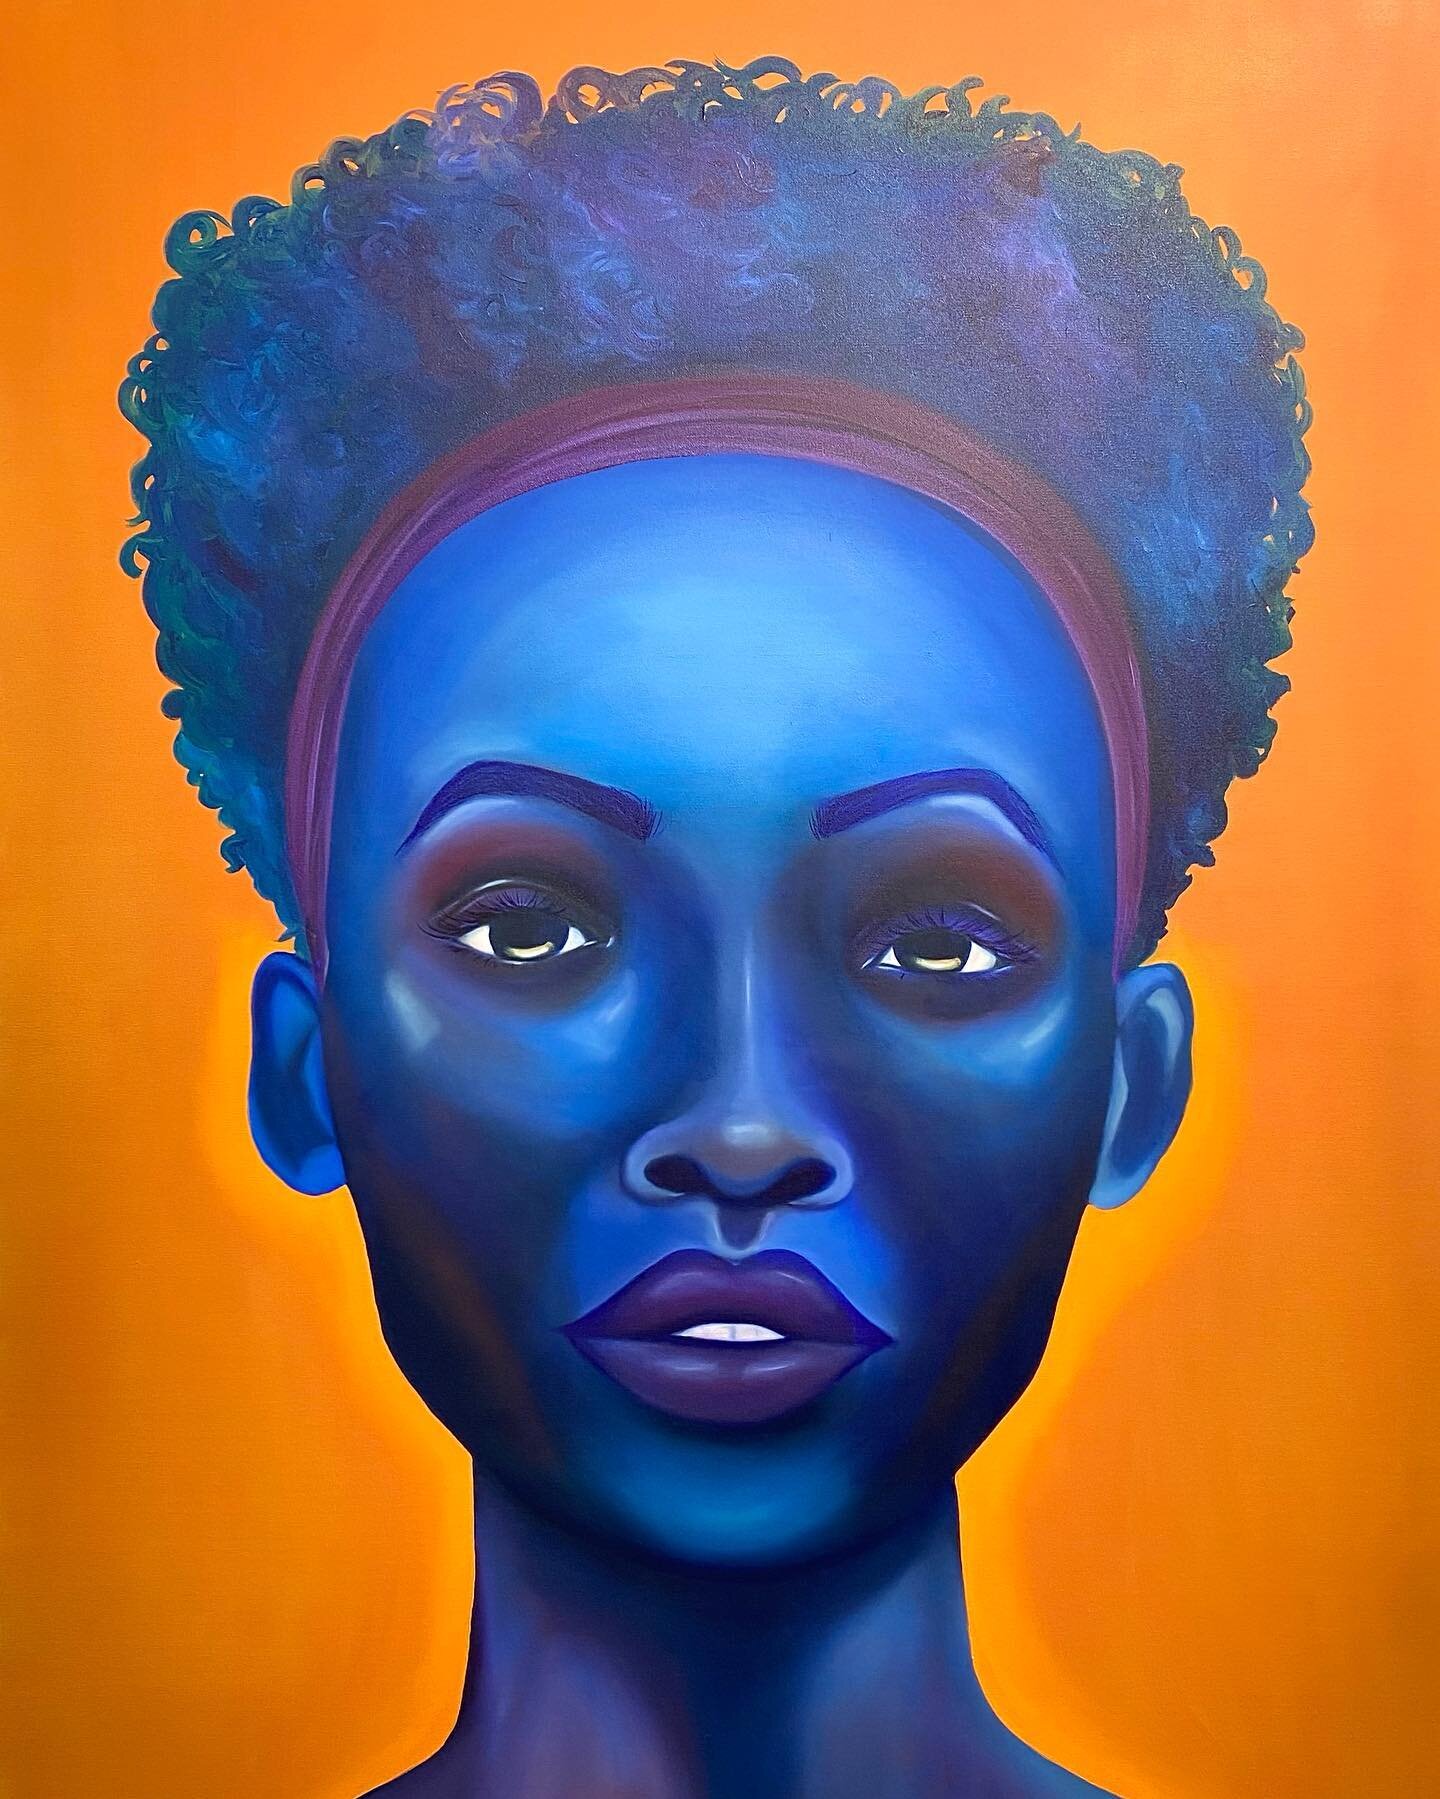 ✨First piece of 2021✨
&ldquo;Indigo&rdquo; 60&rdquo;x48&rdquo; Oil on canvas. 

I really love the blue/orange combo and couldn&rsquo;t help creating another piece using that color palette. 

Be on the look out for my thesis show information in a few 